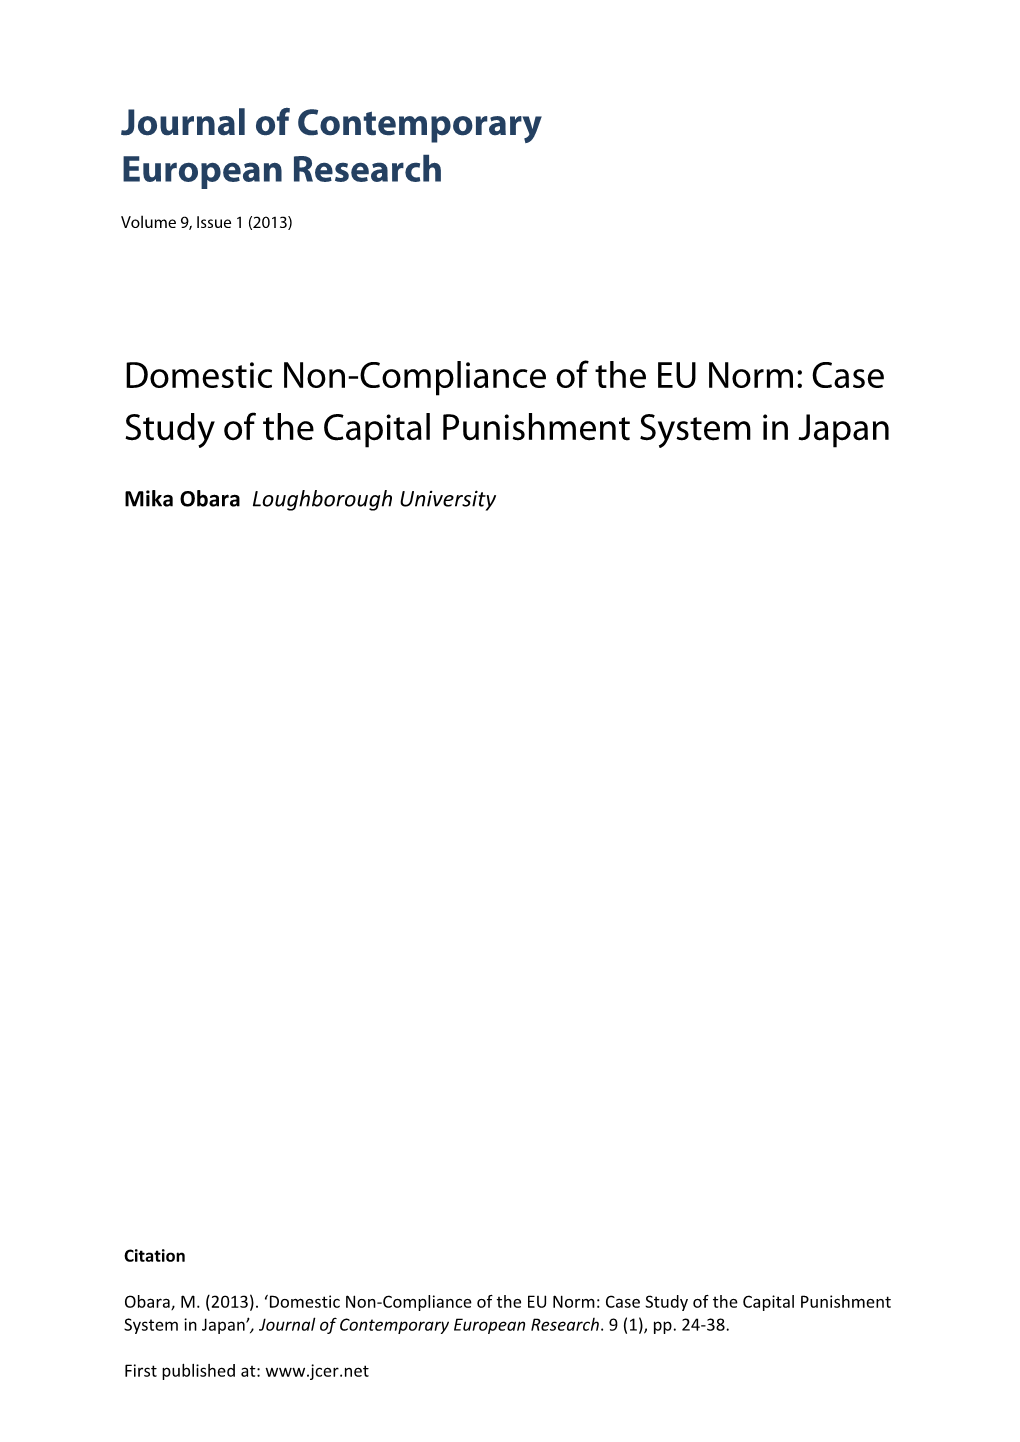 Case Study of the Capital Punishment System in Japan